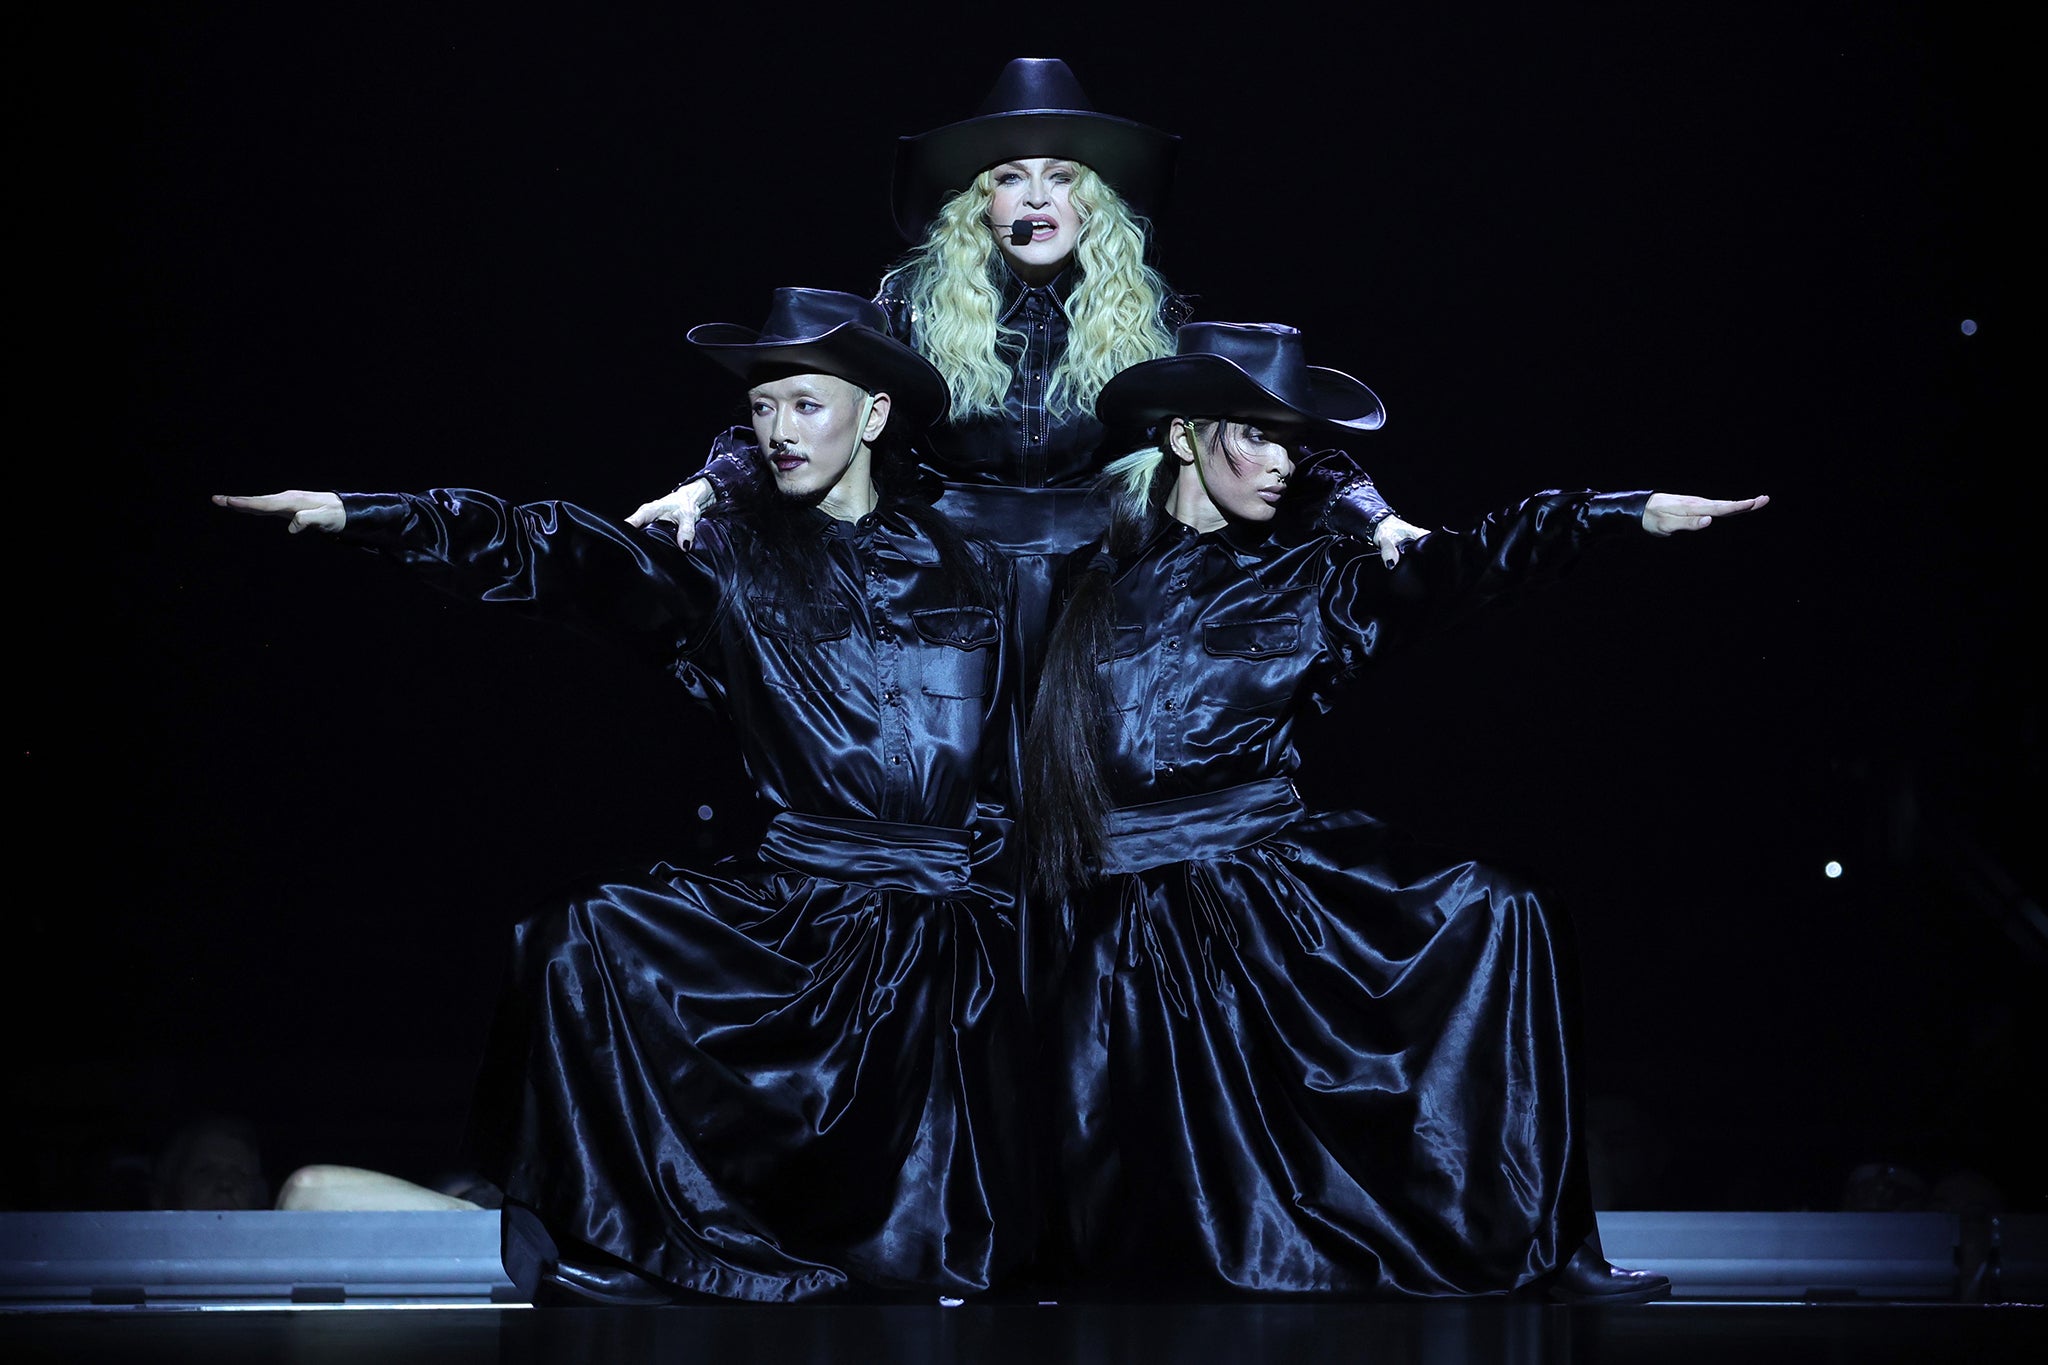 As Madonna had come on stage over half an hour late, fans who lived out of London had to miss half of her show to catch their last trains home